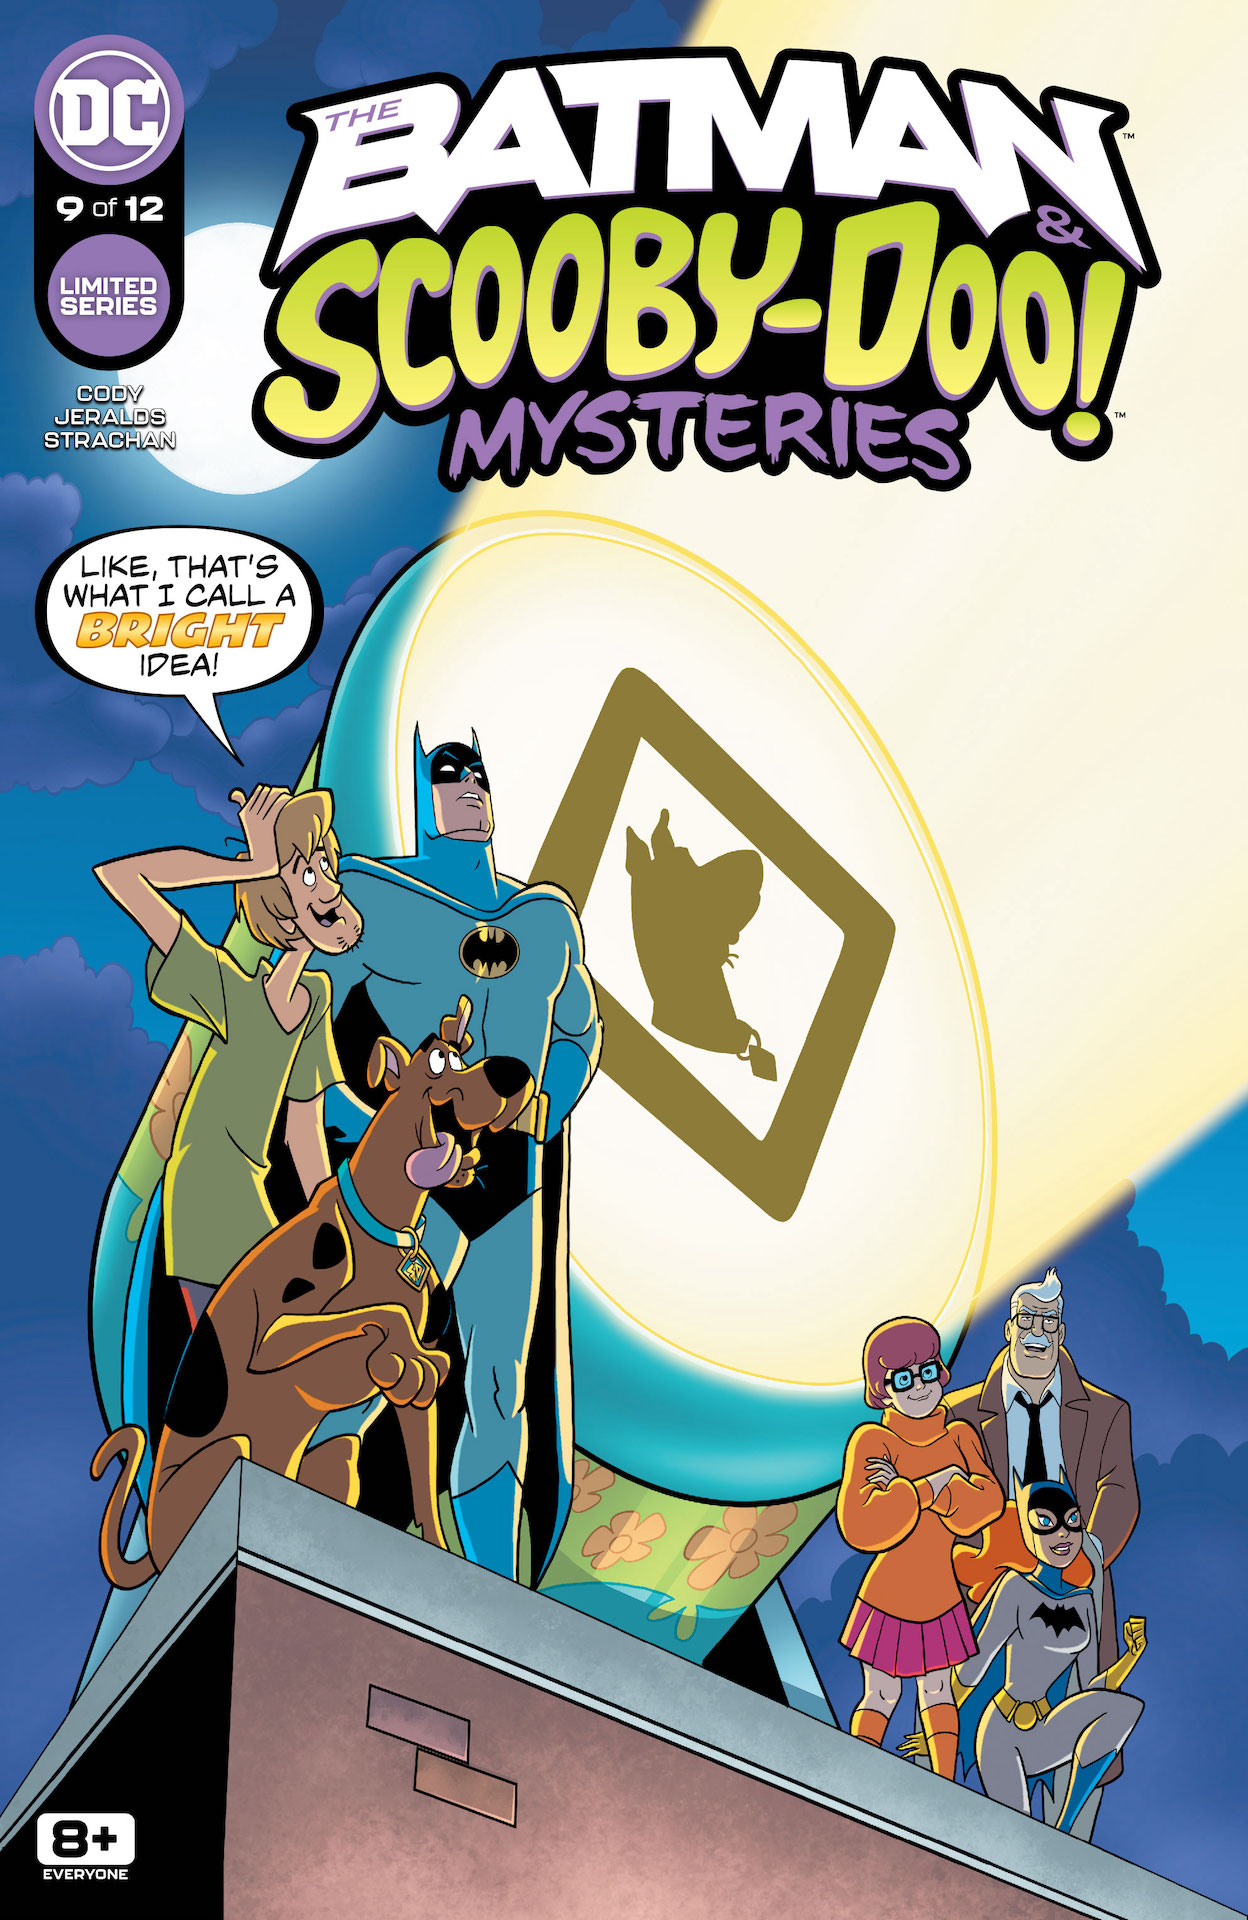 DC Preview: The Batman & Scooby-Doo Mysteries #9